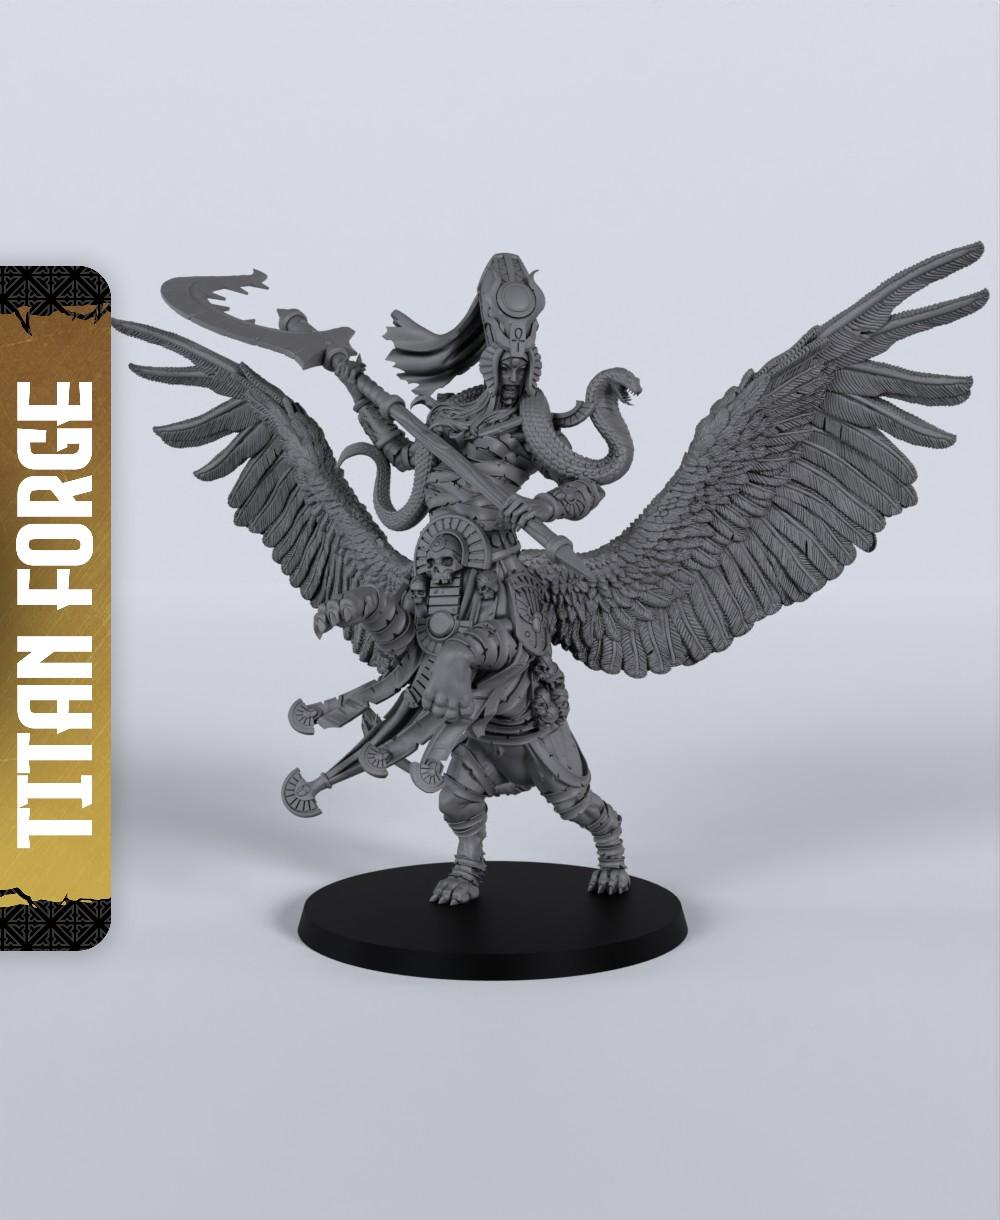 Sphinx - With Free Dragon Warhammer - 5e DnD Inspired for RPG and Wargamers 3d model